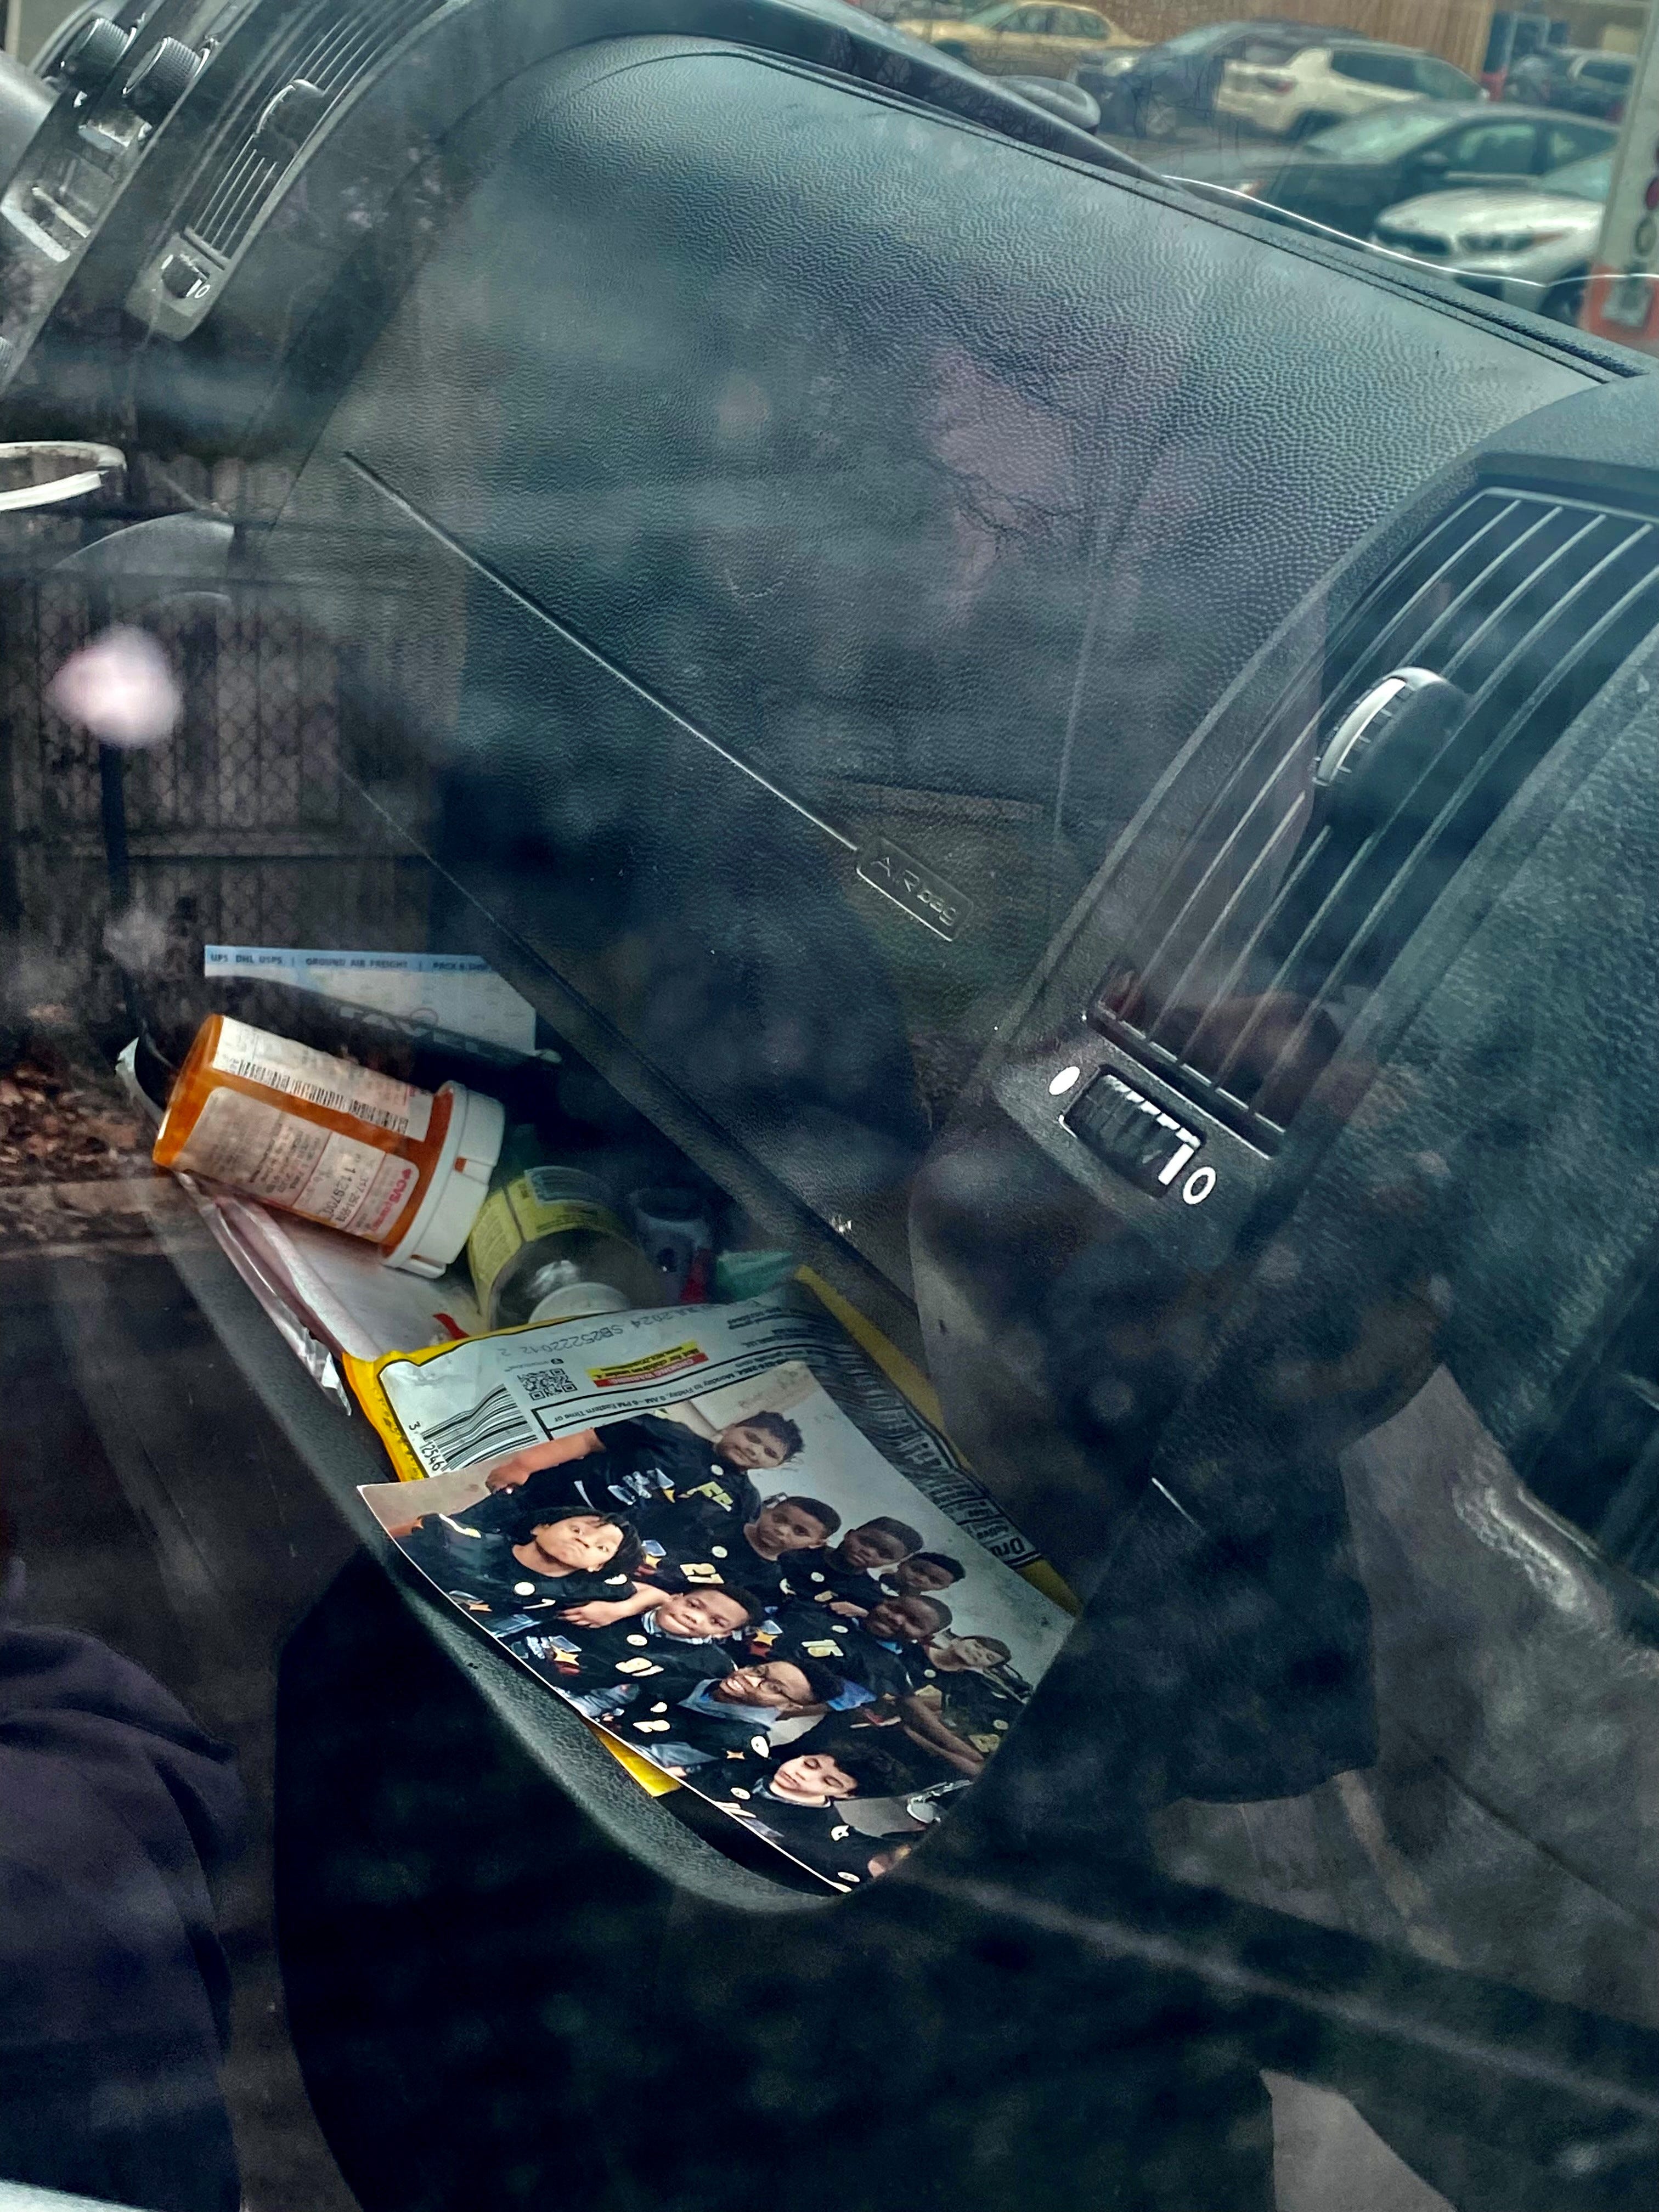 A photo of the Indy Steelers sits in the console of the van where coach Richard Donnell Hamilton died. Coach Nell, as he was known to members of the youth football program, was shot while riding in the passenger seat during a road rage incident on Jan. 11, 2023, according to Indiana State Police.